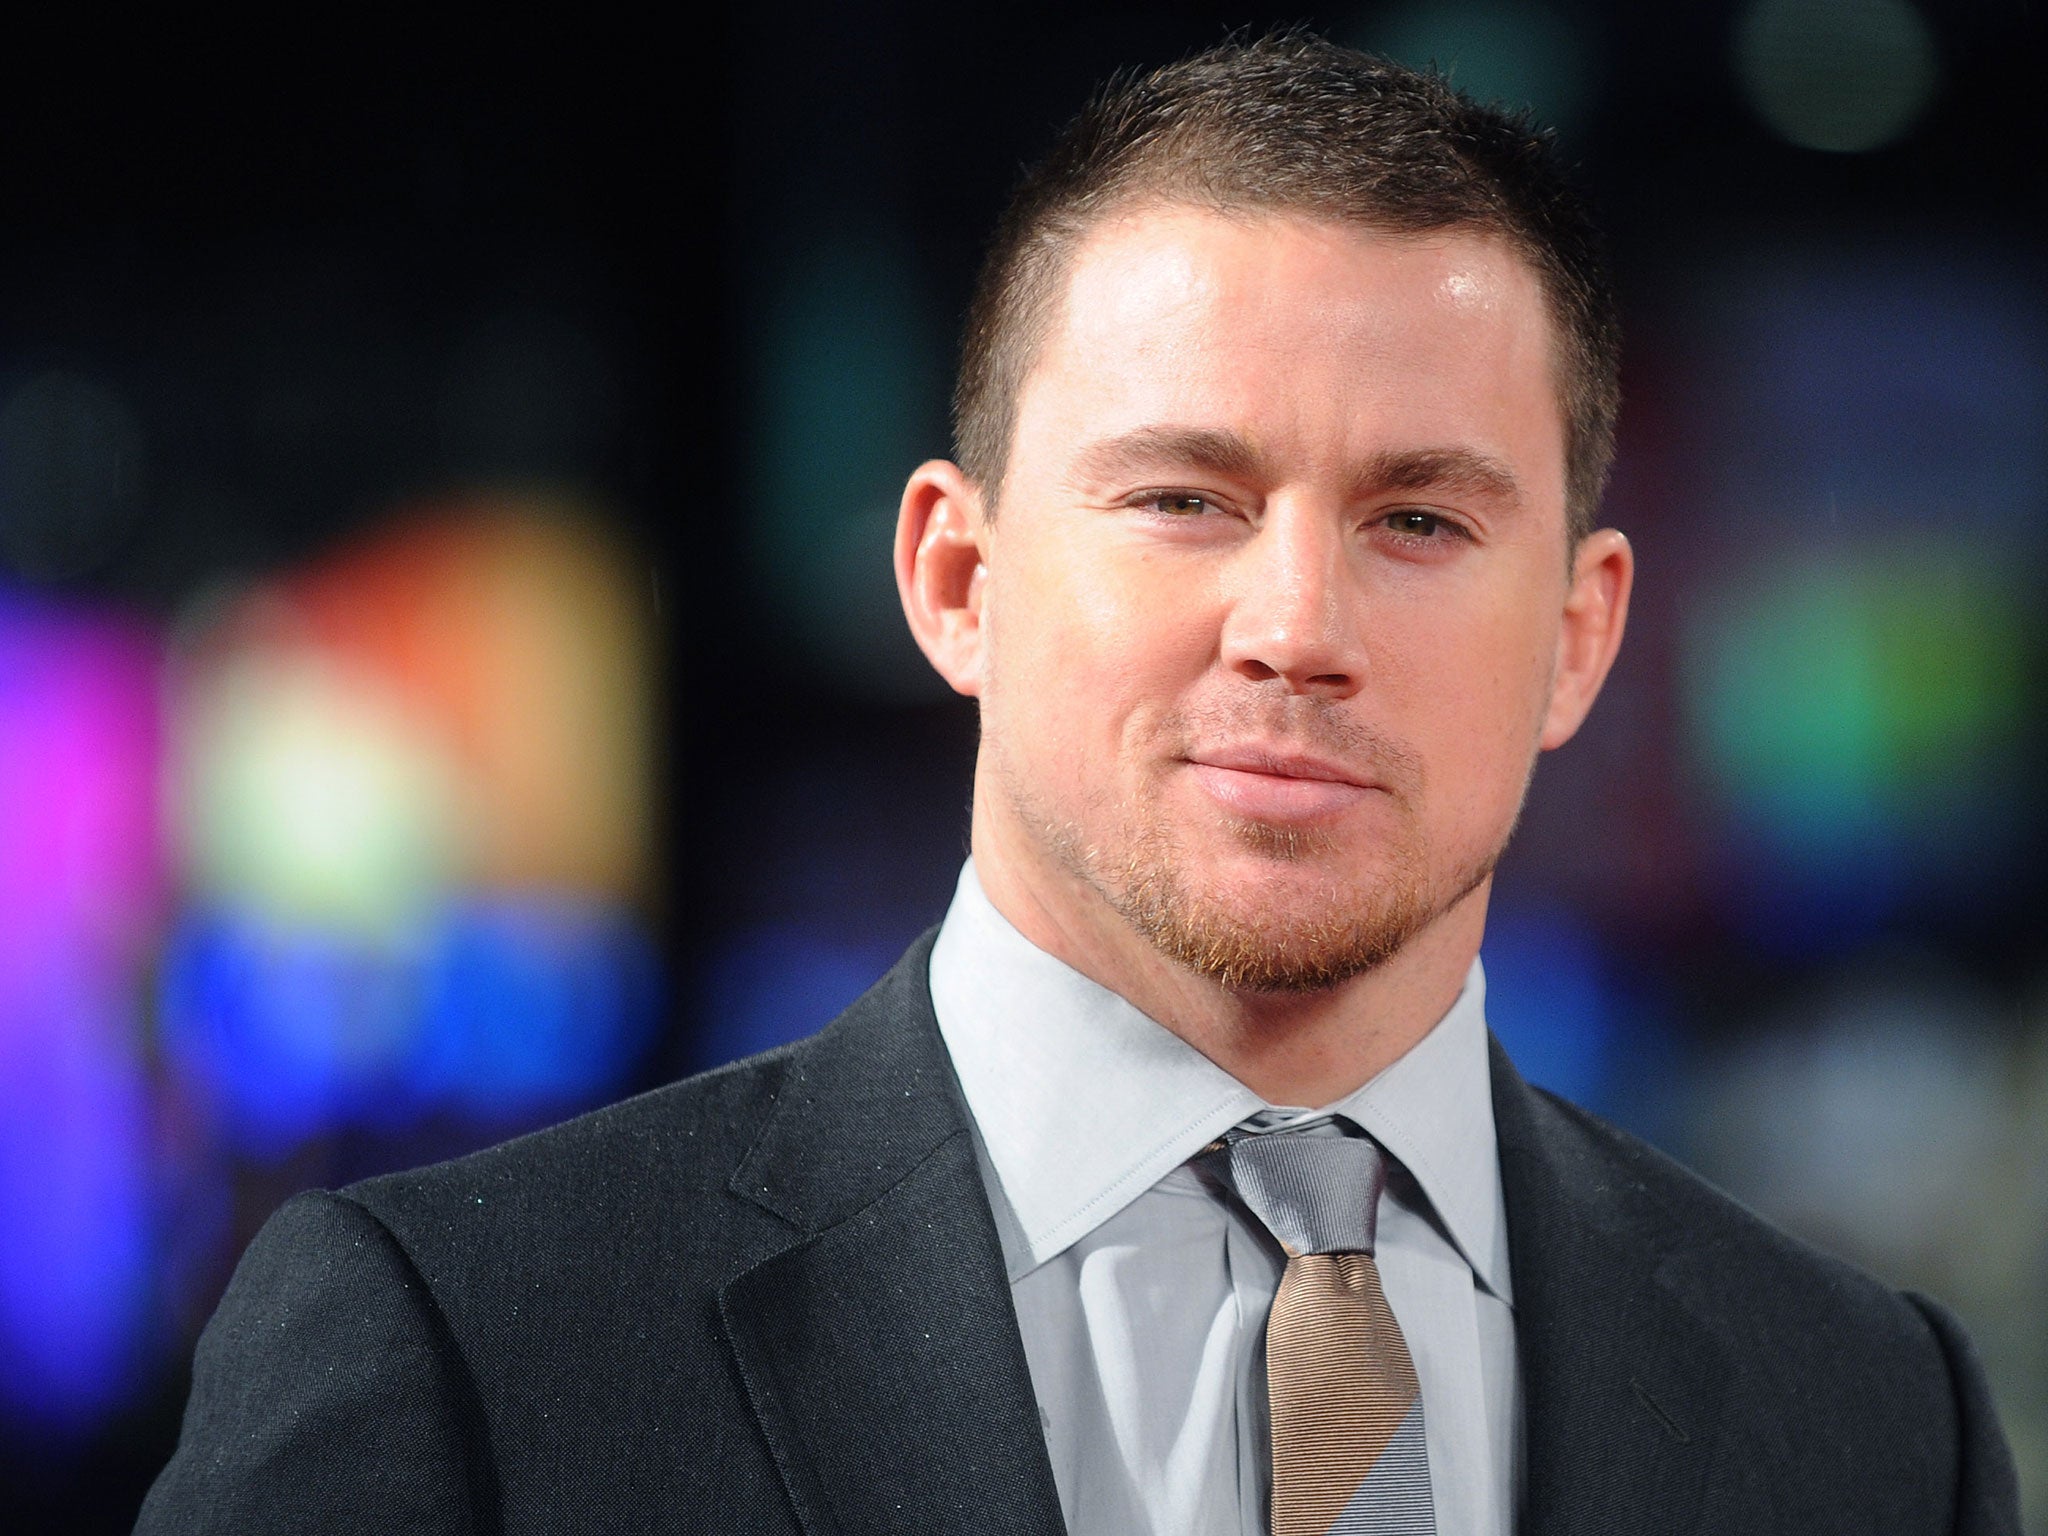 Channing Tatum will star in The Hateful Eight in an as yet unspecified role